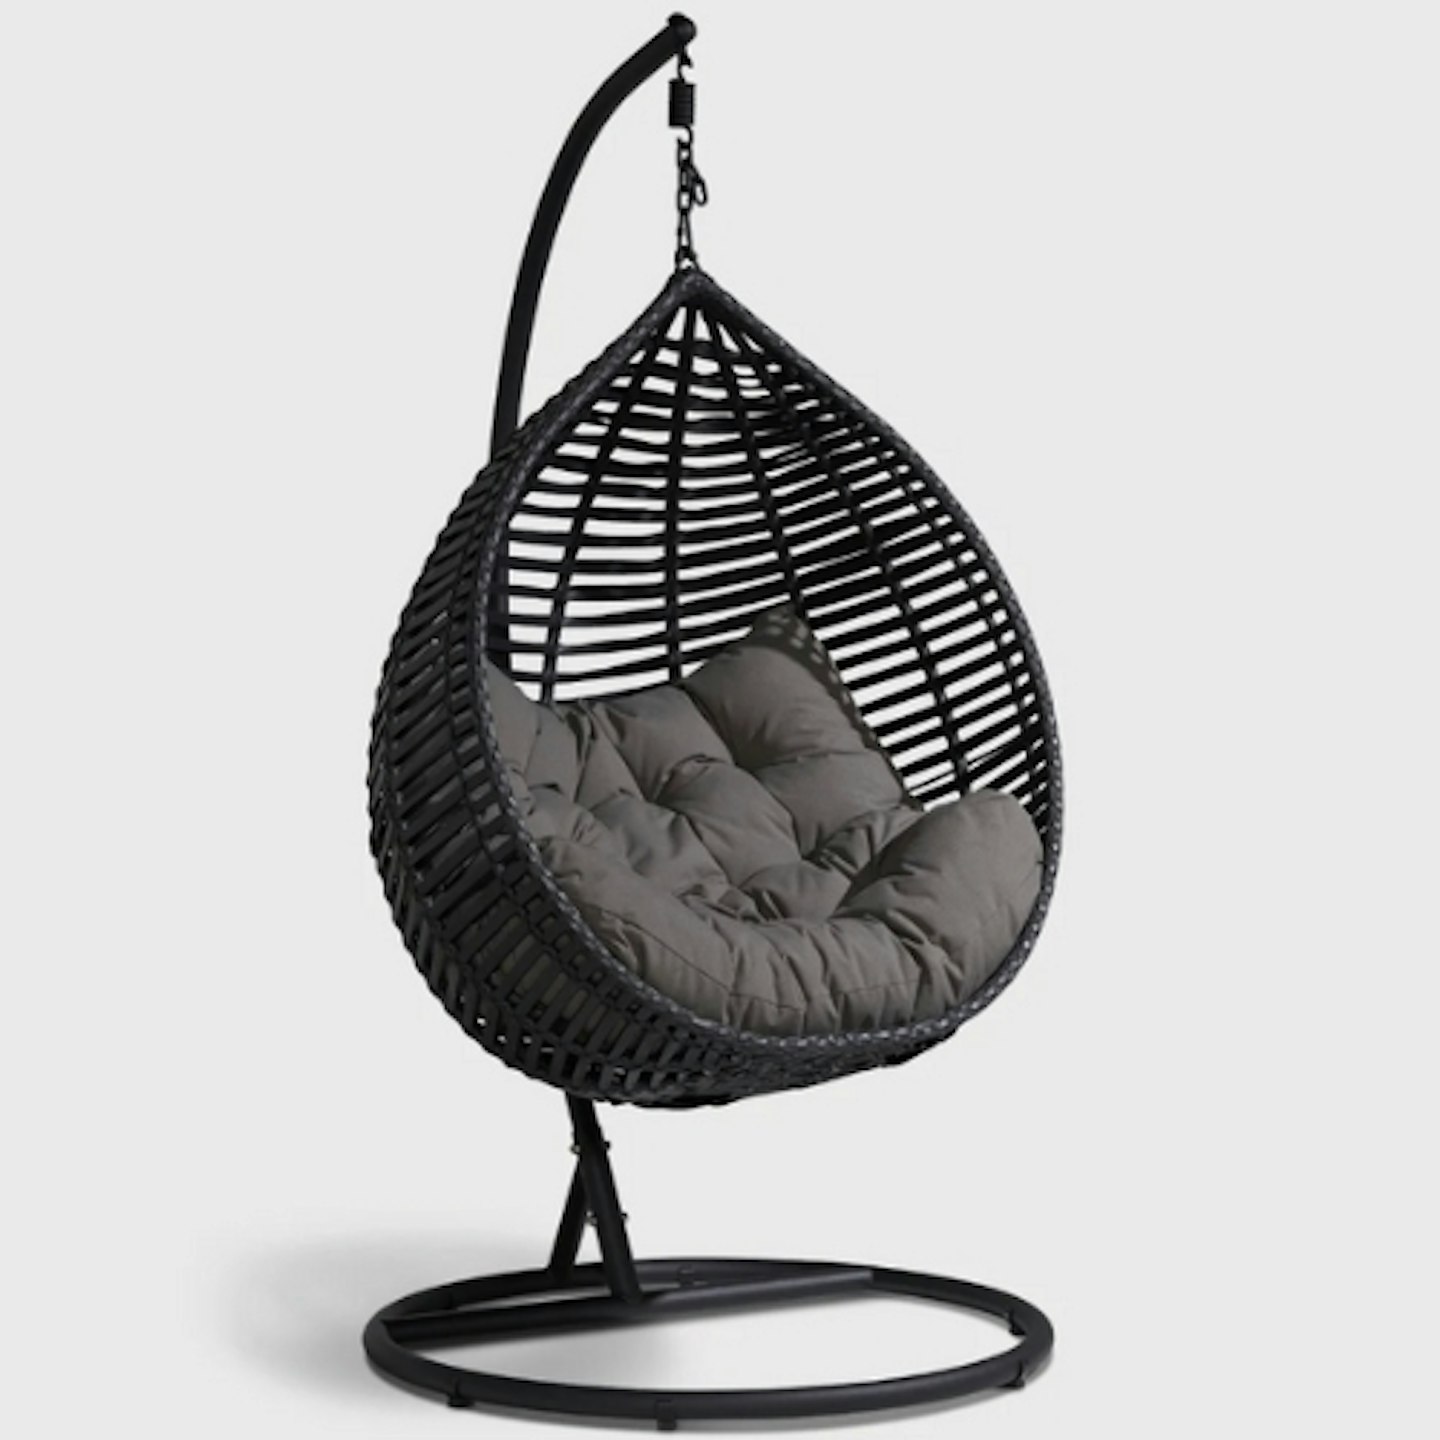 Barker & Stonehouse Garcia Black Garden Swing Hanging Chair With Base